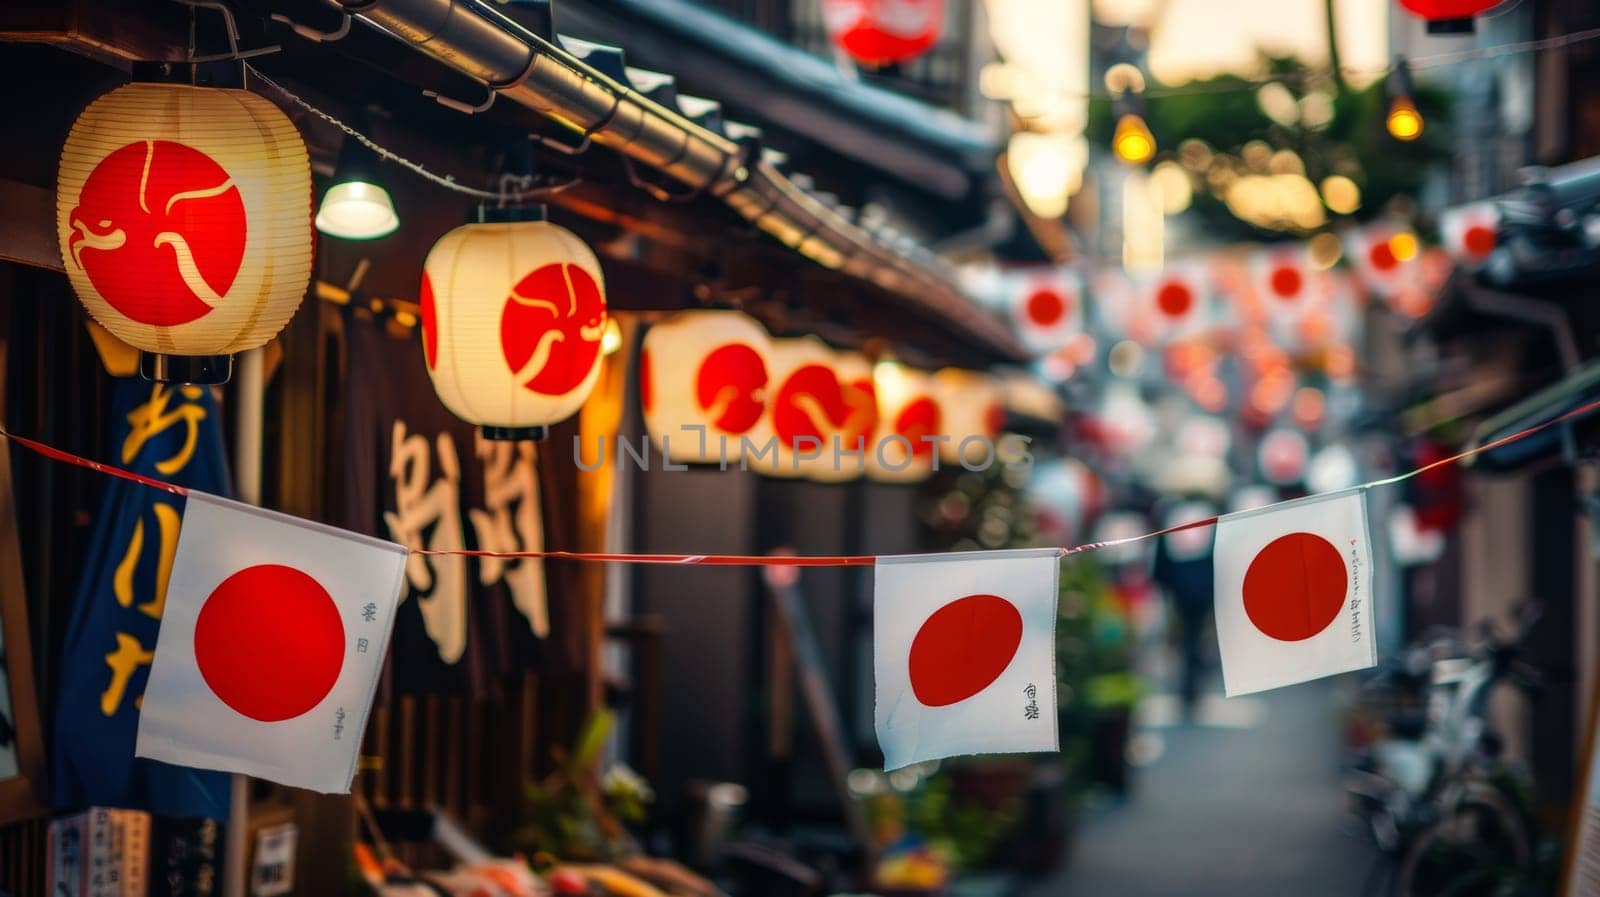 An atmospheric evening view of a Japanese alley, illuminated by paper lanterns with the red circle emblem, creating a warm, welcoming ambiance. by sfinks